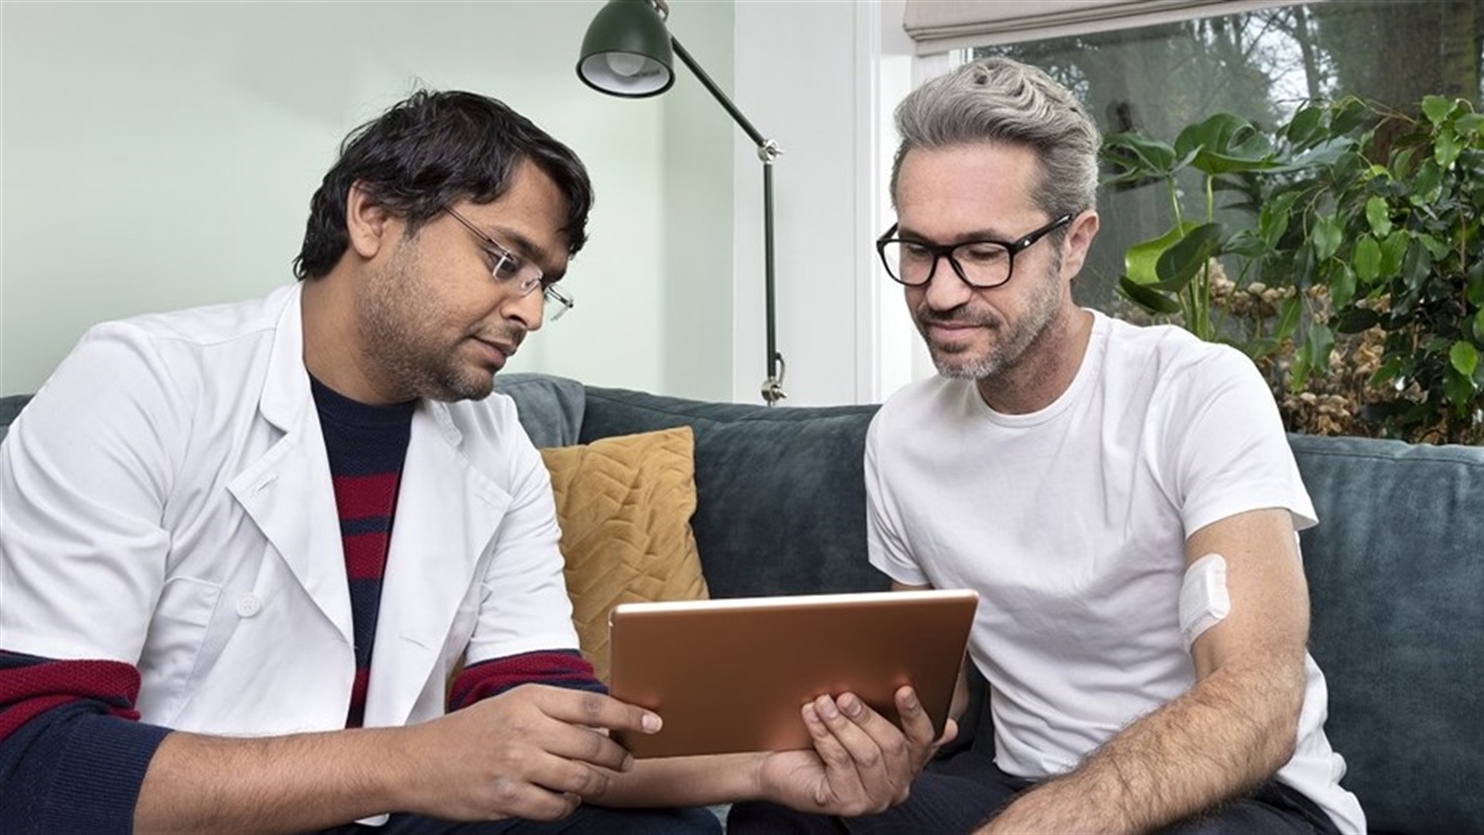 A patient and his doctor discuss the results of the wearable medical photonic patches on a tablet